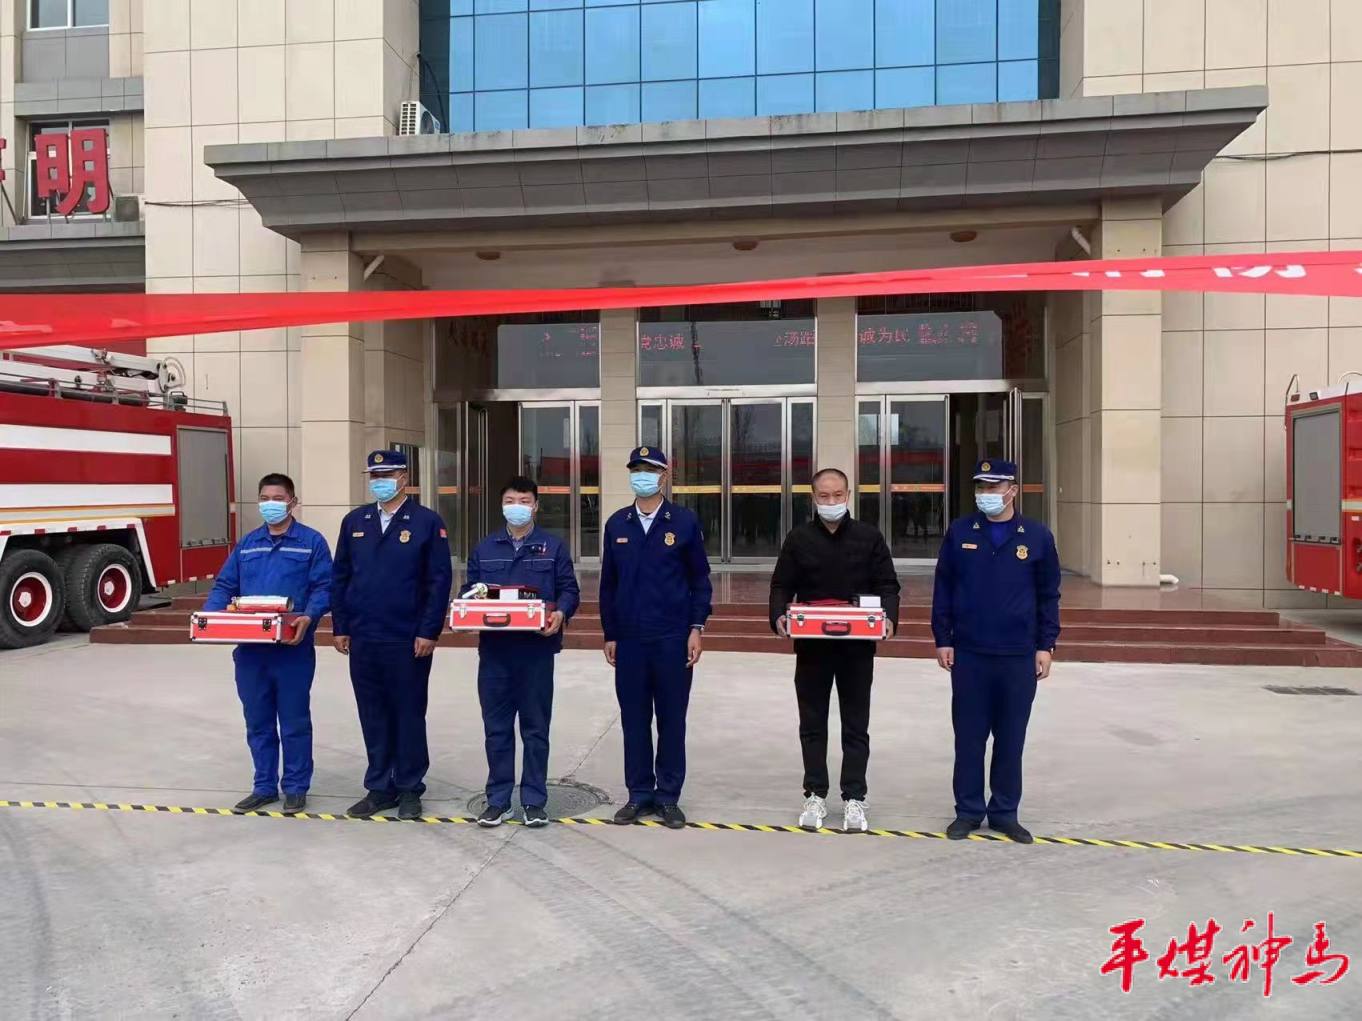 The company sent personnel to participate in the "Mini Fire Station" competition, a key un